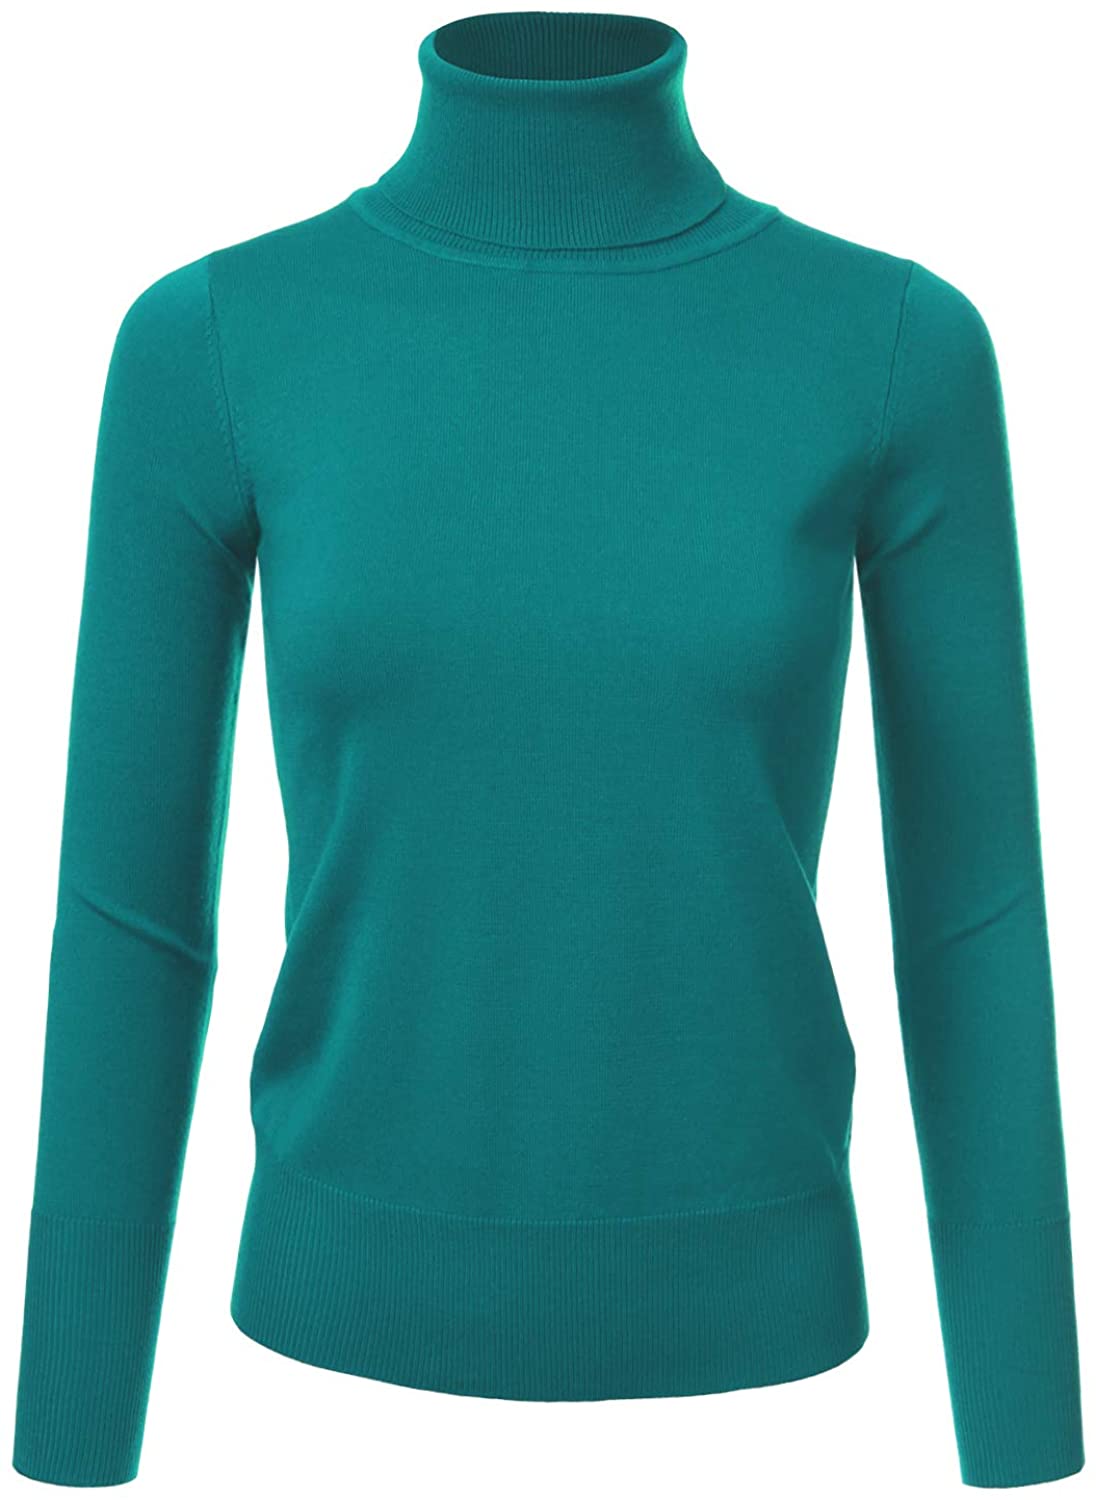 NINEXIS Women's Long Sleeve Turtle Neck Knit Sweater Top with Plus Size ...